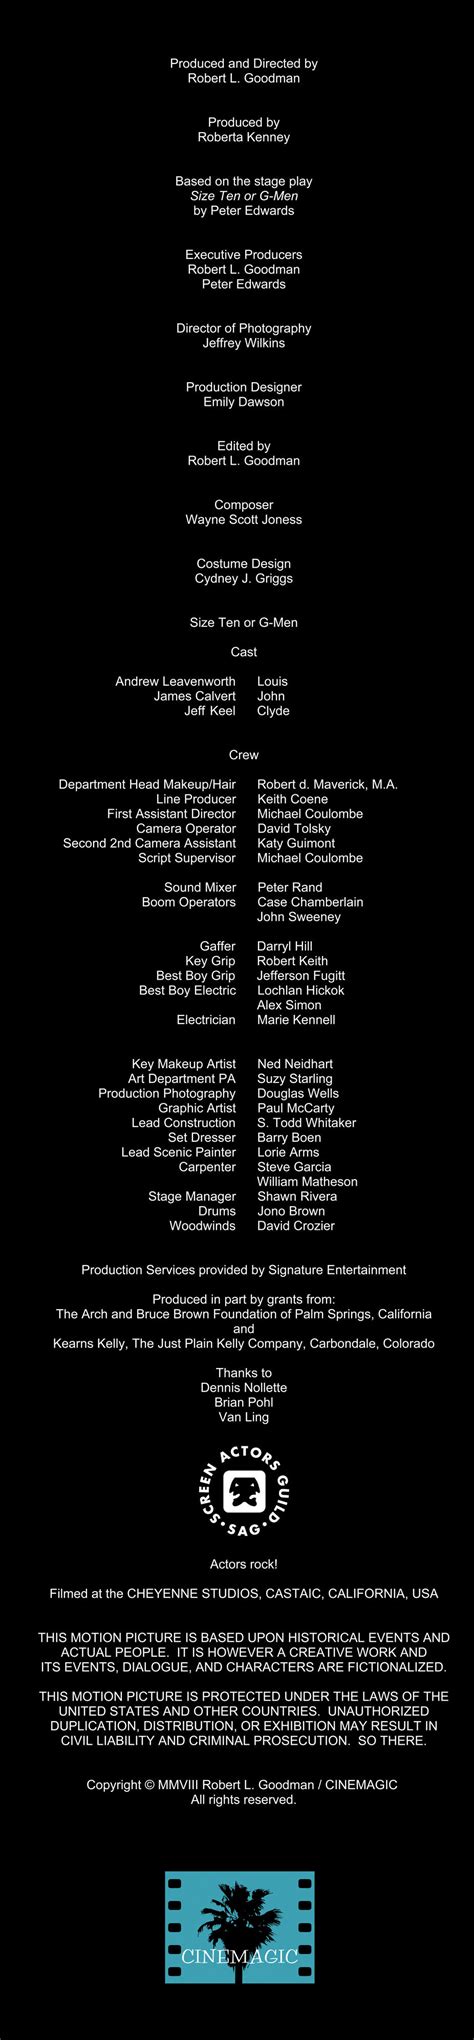 Cities Of The Future lyrics credits, cast, crew of song